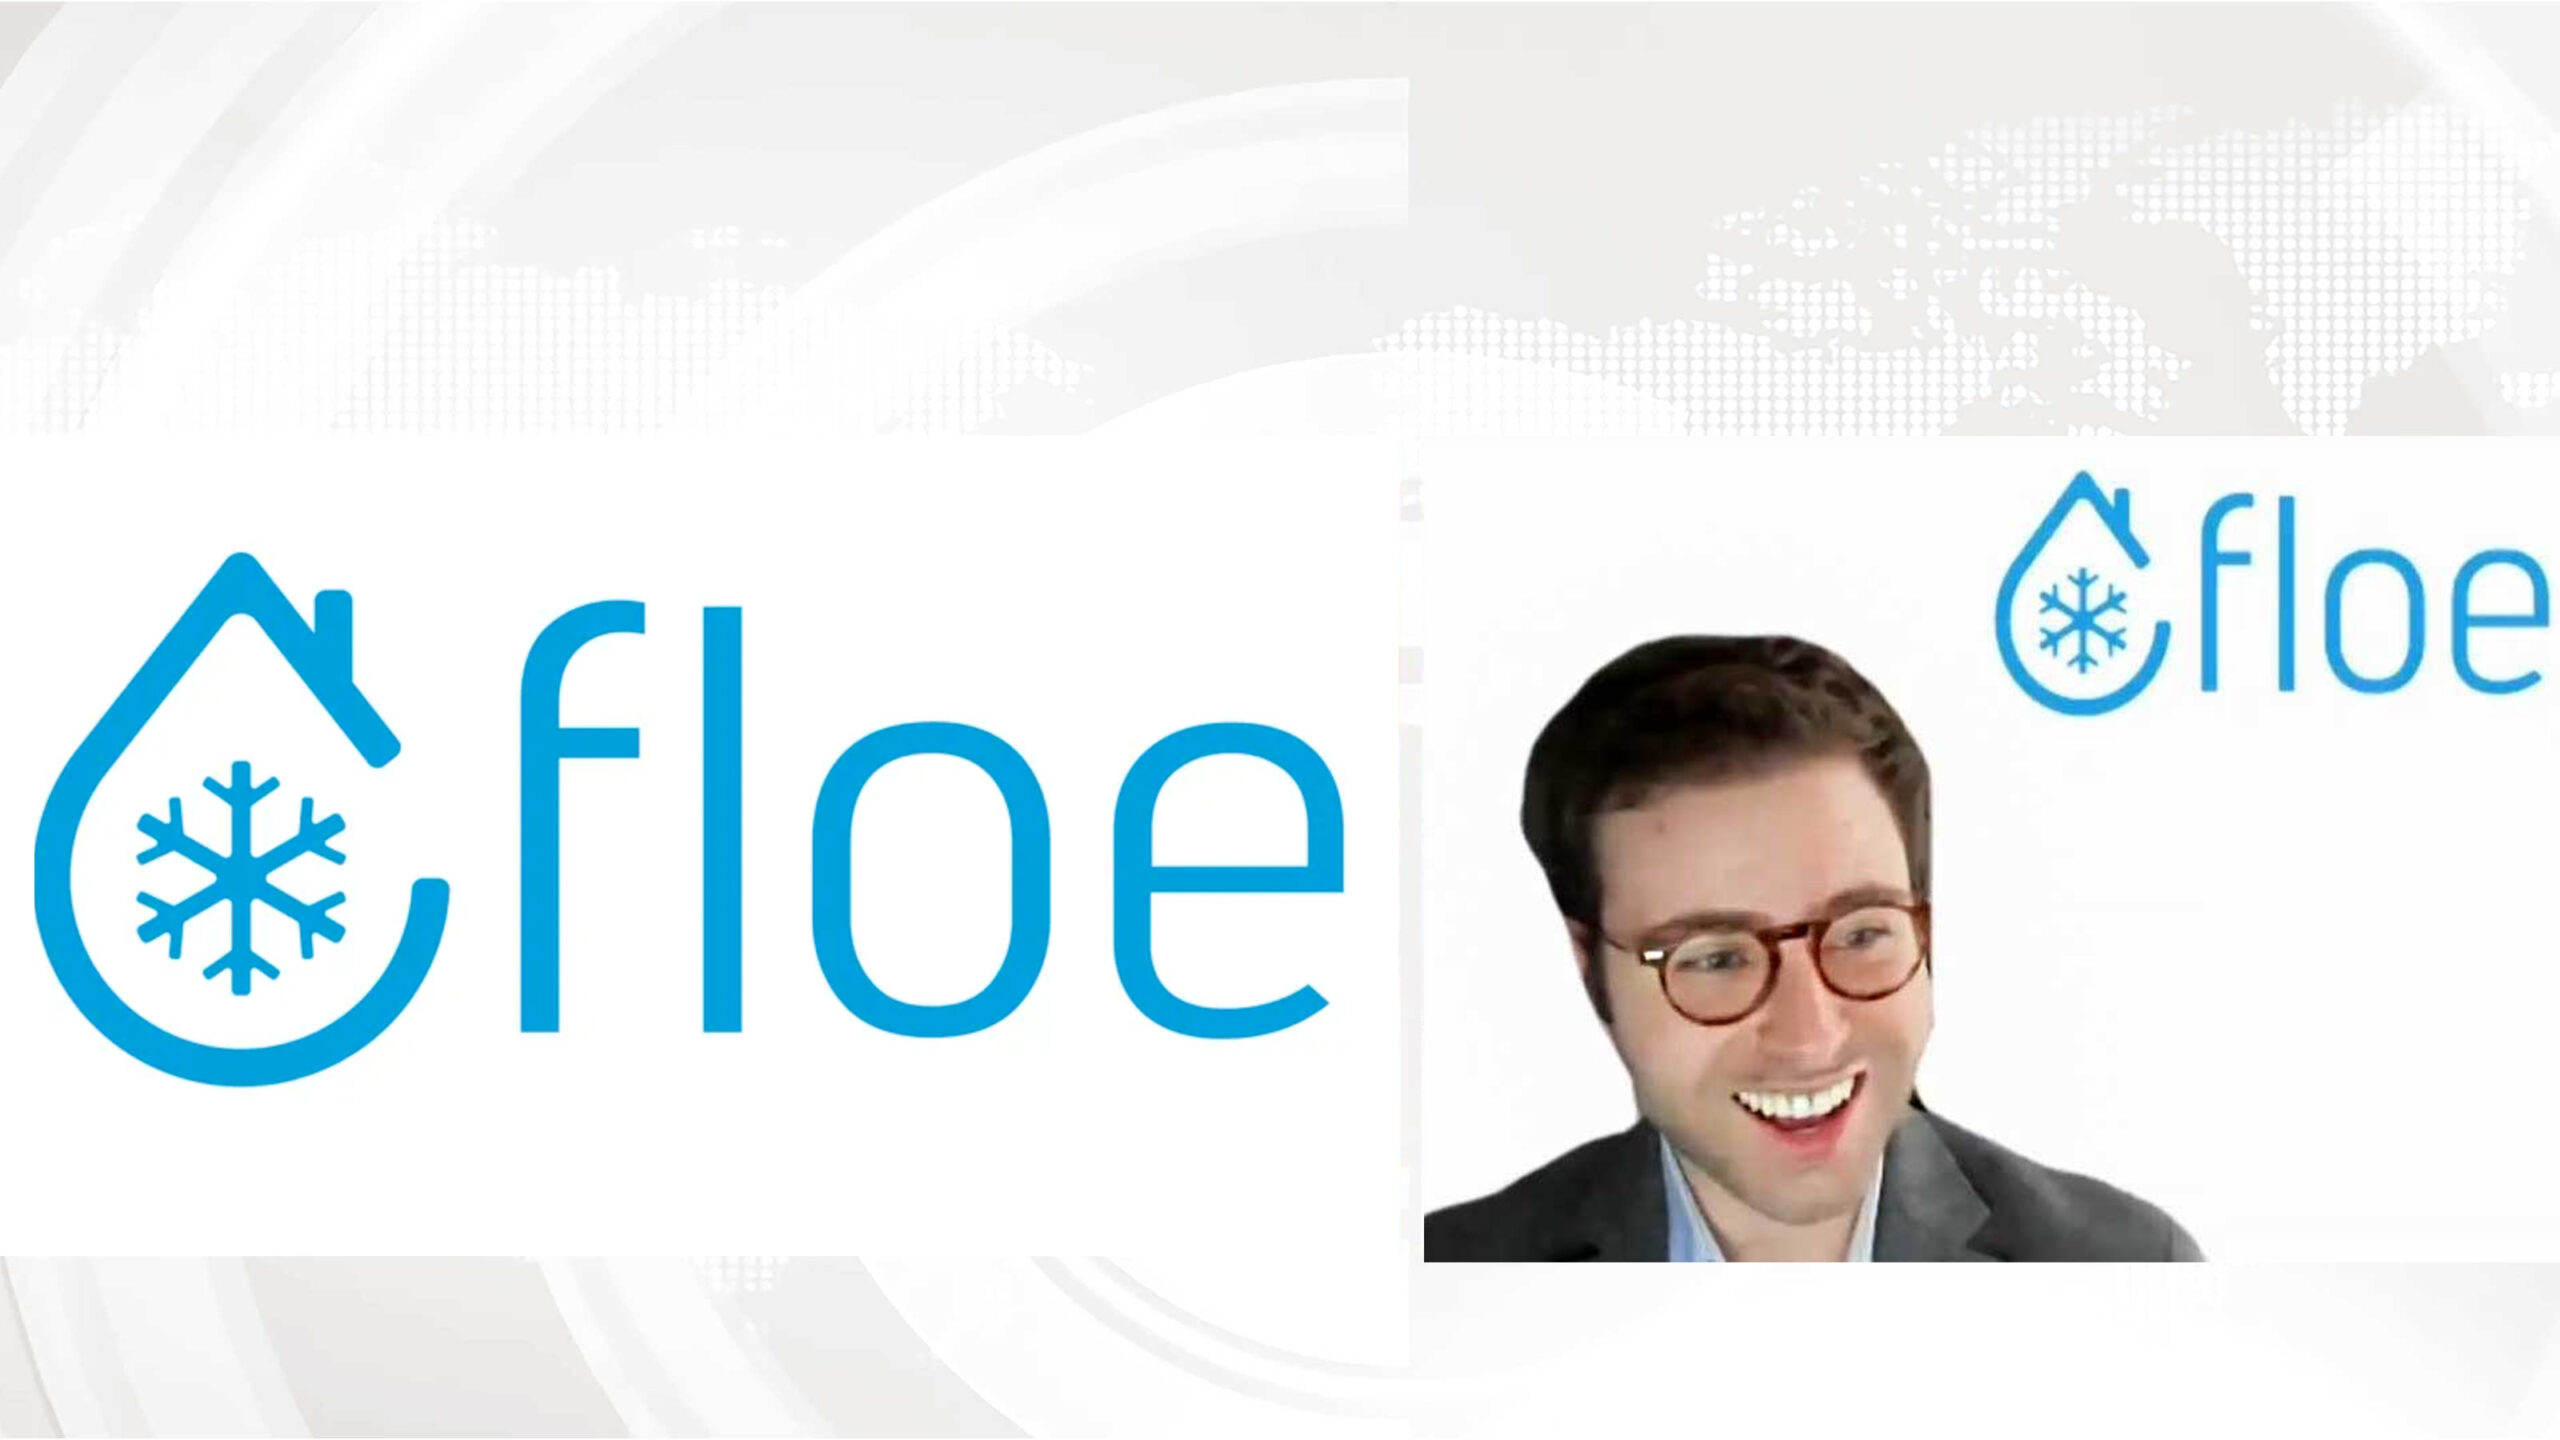 David Dellal, CEO and founder of Floe